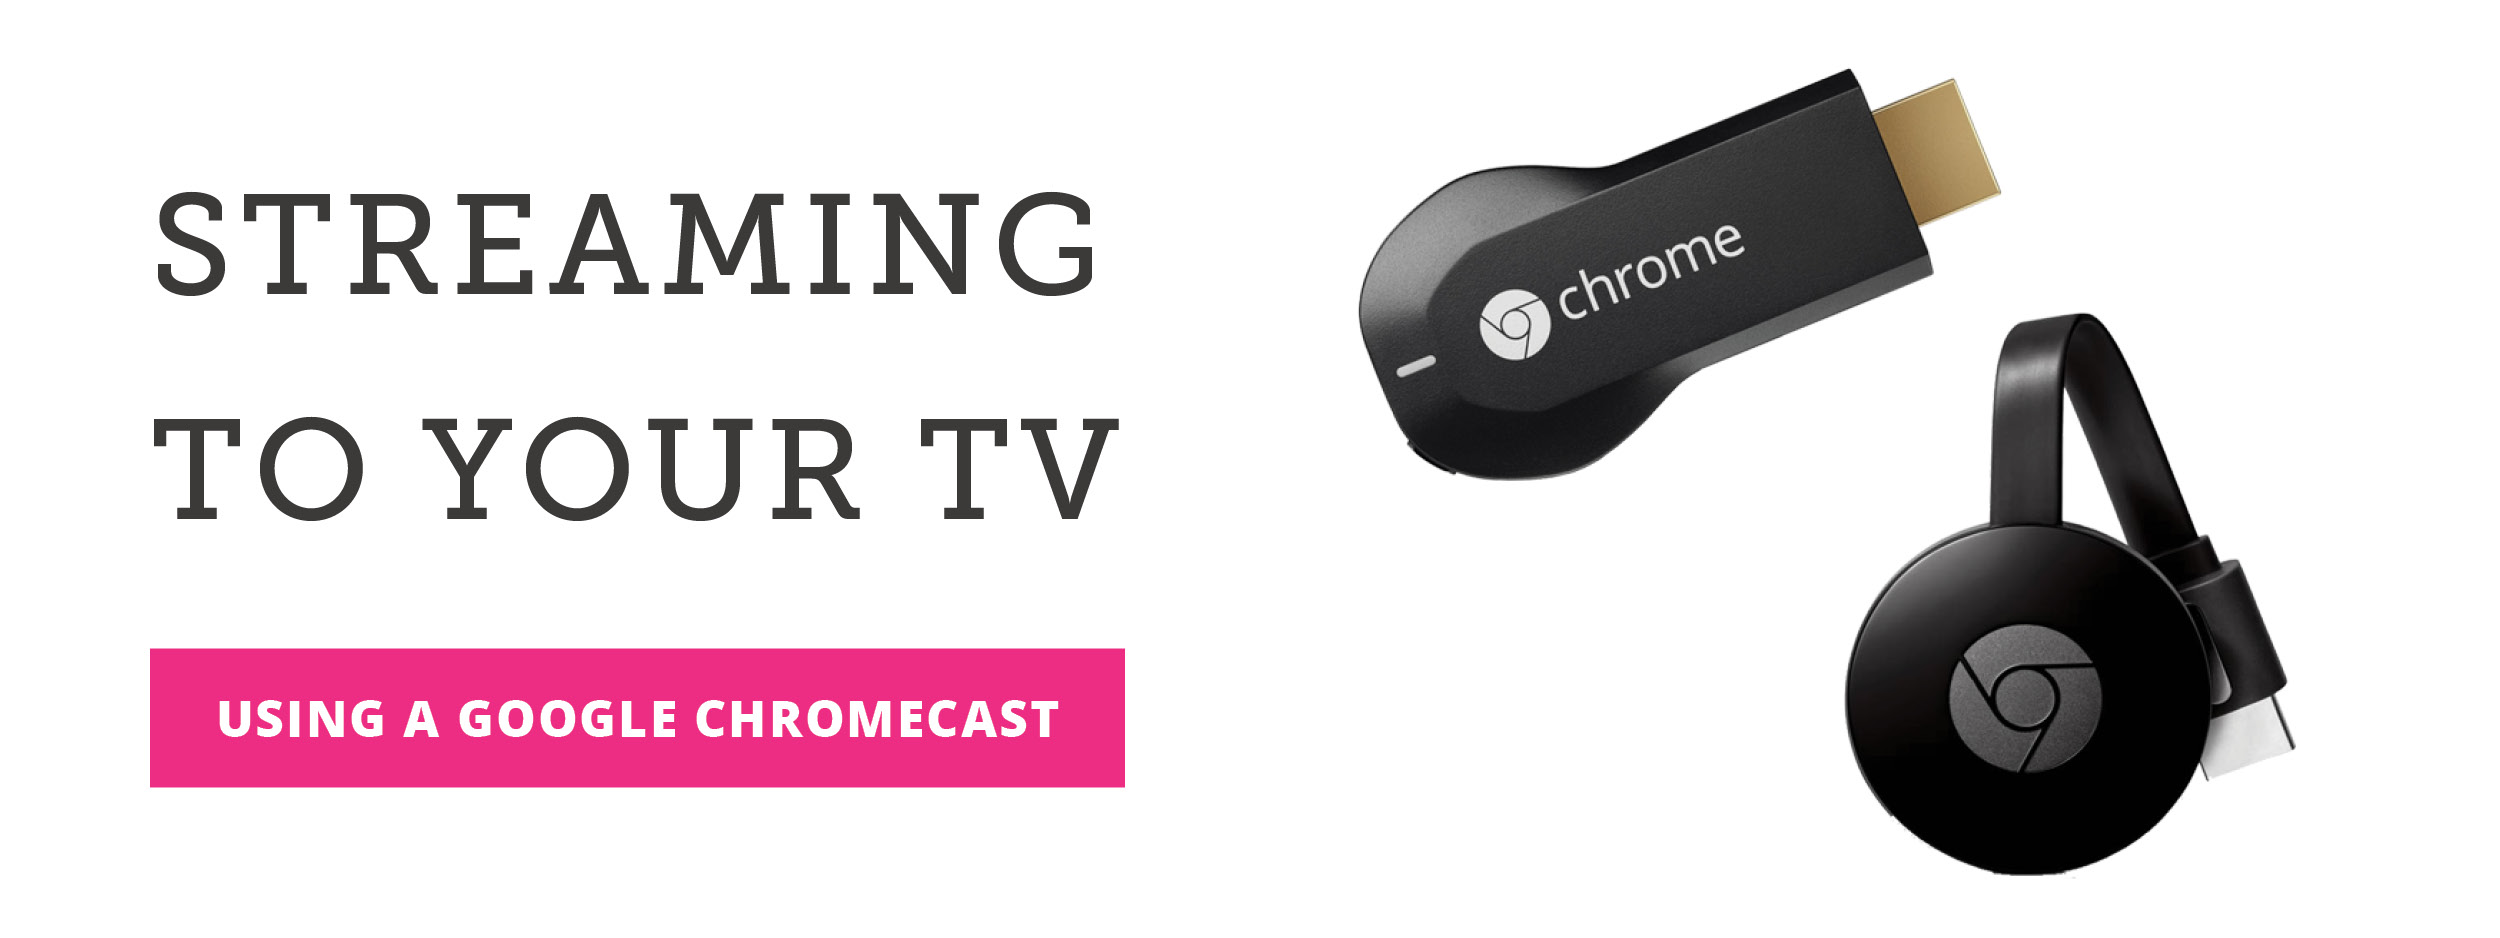 stamtavle mikrofon Monet How to Stream to Your TV Using a Google Chromecast | National Sewing Circle